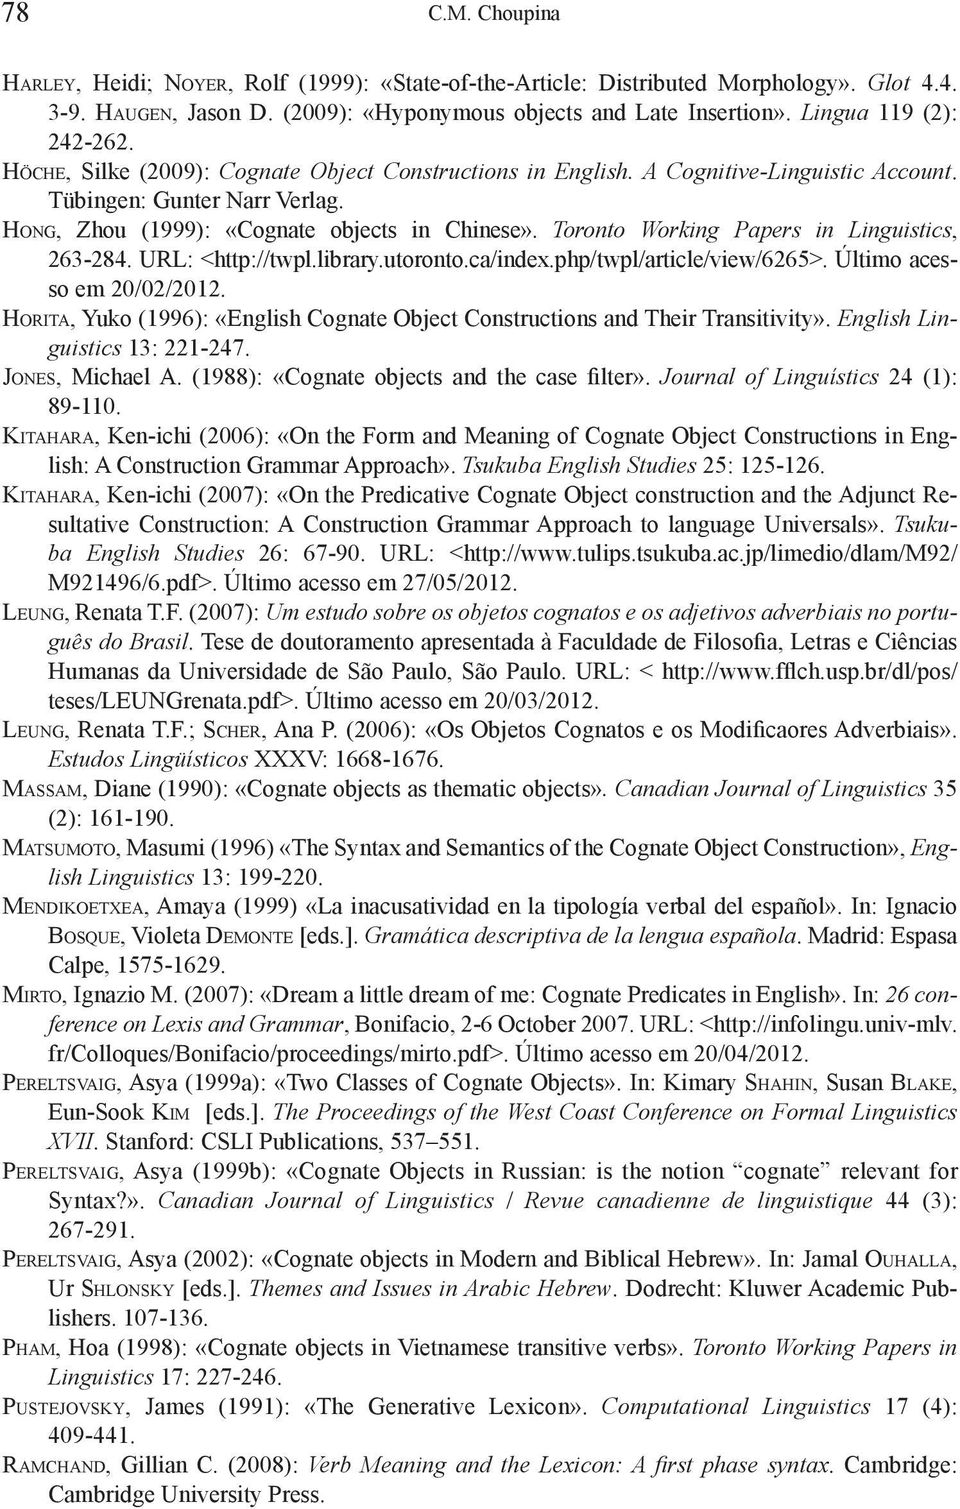 Ho n g, Zhou (1999): «Cognate objects in Chinese». Toronto Working Papers in Linguistics, 263-284. URL: <http://twpl.library.utoronto.ca/index.php/twpl/article/view/6265>. Último acesso em 20/02/2012.